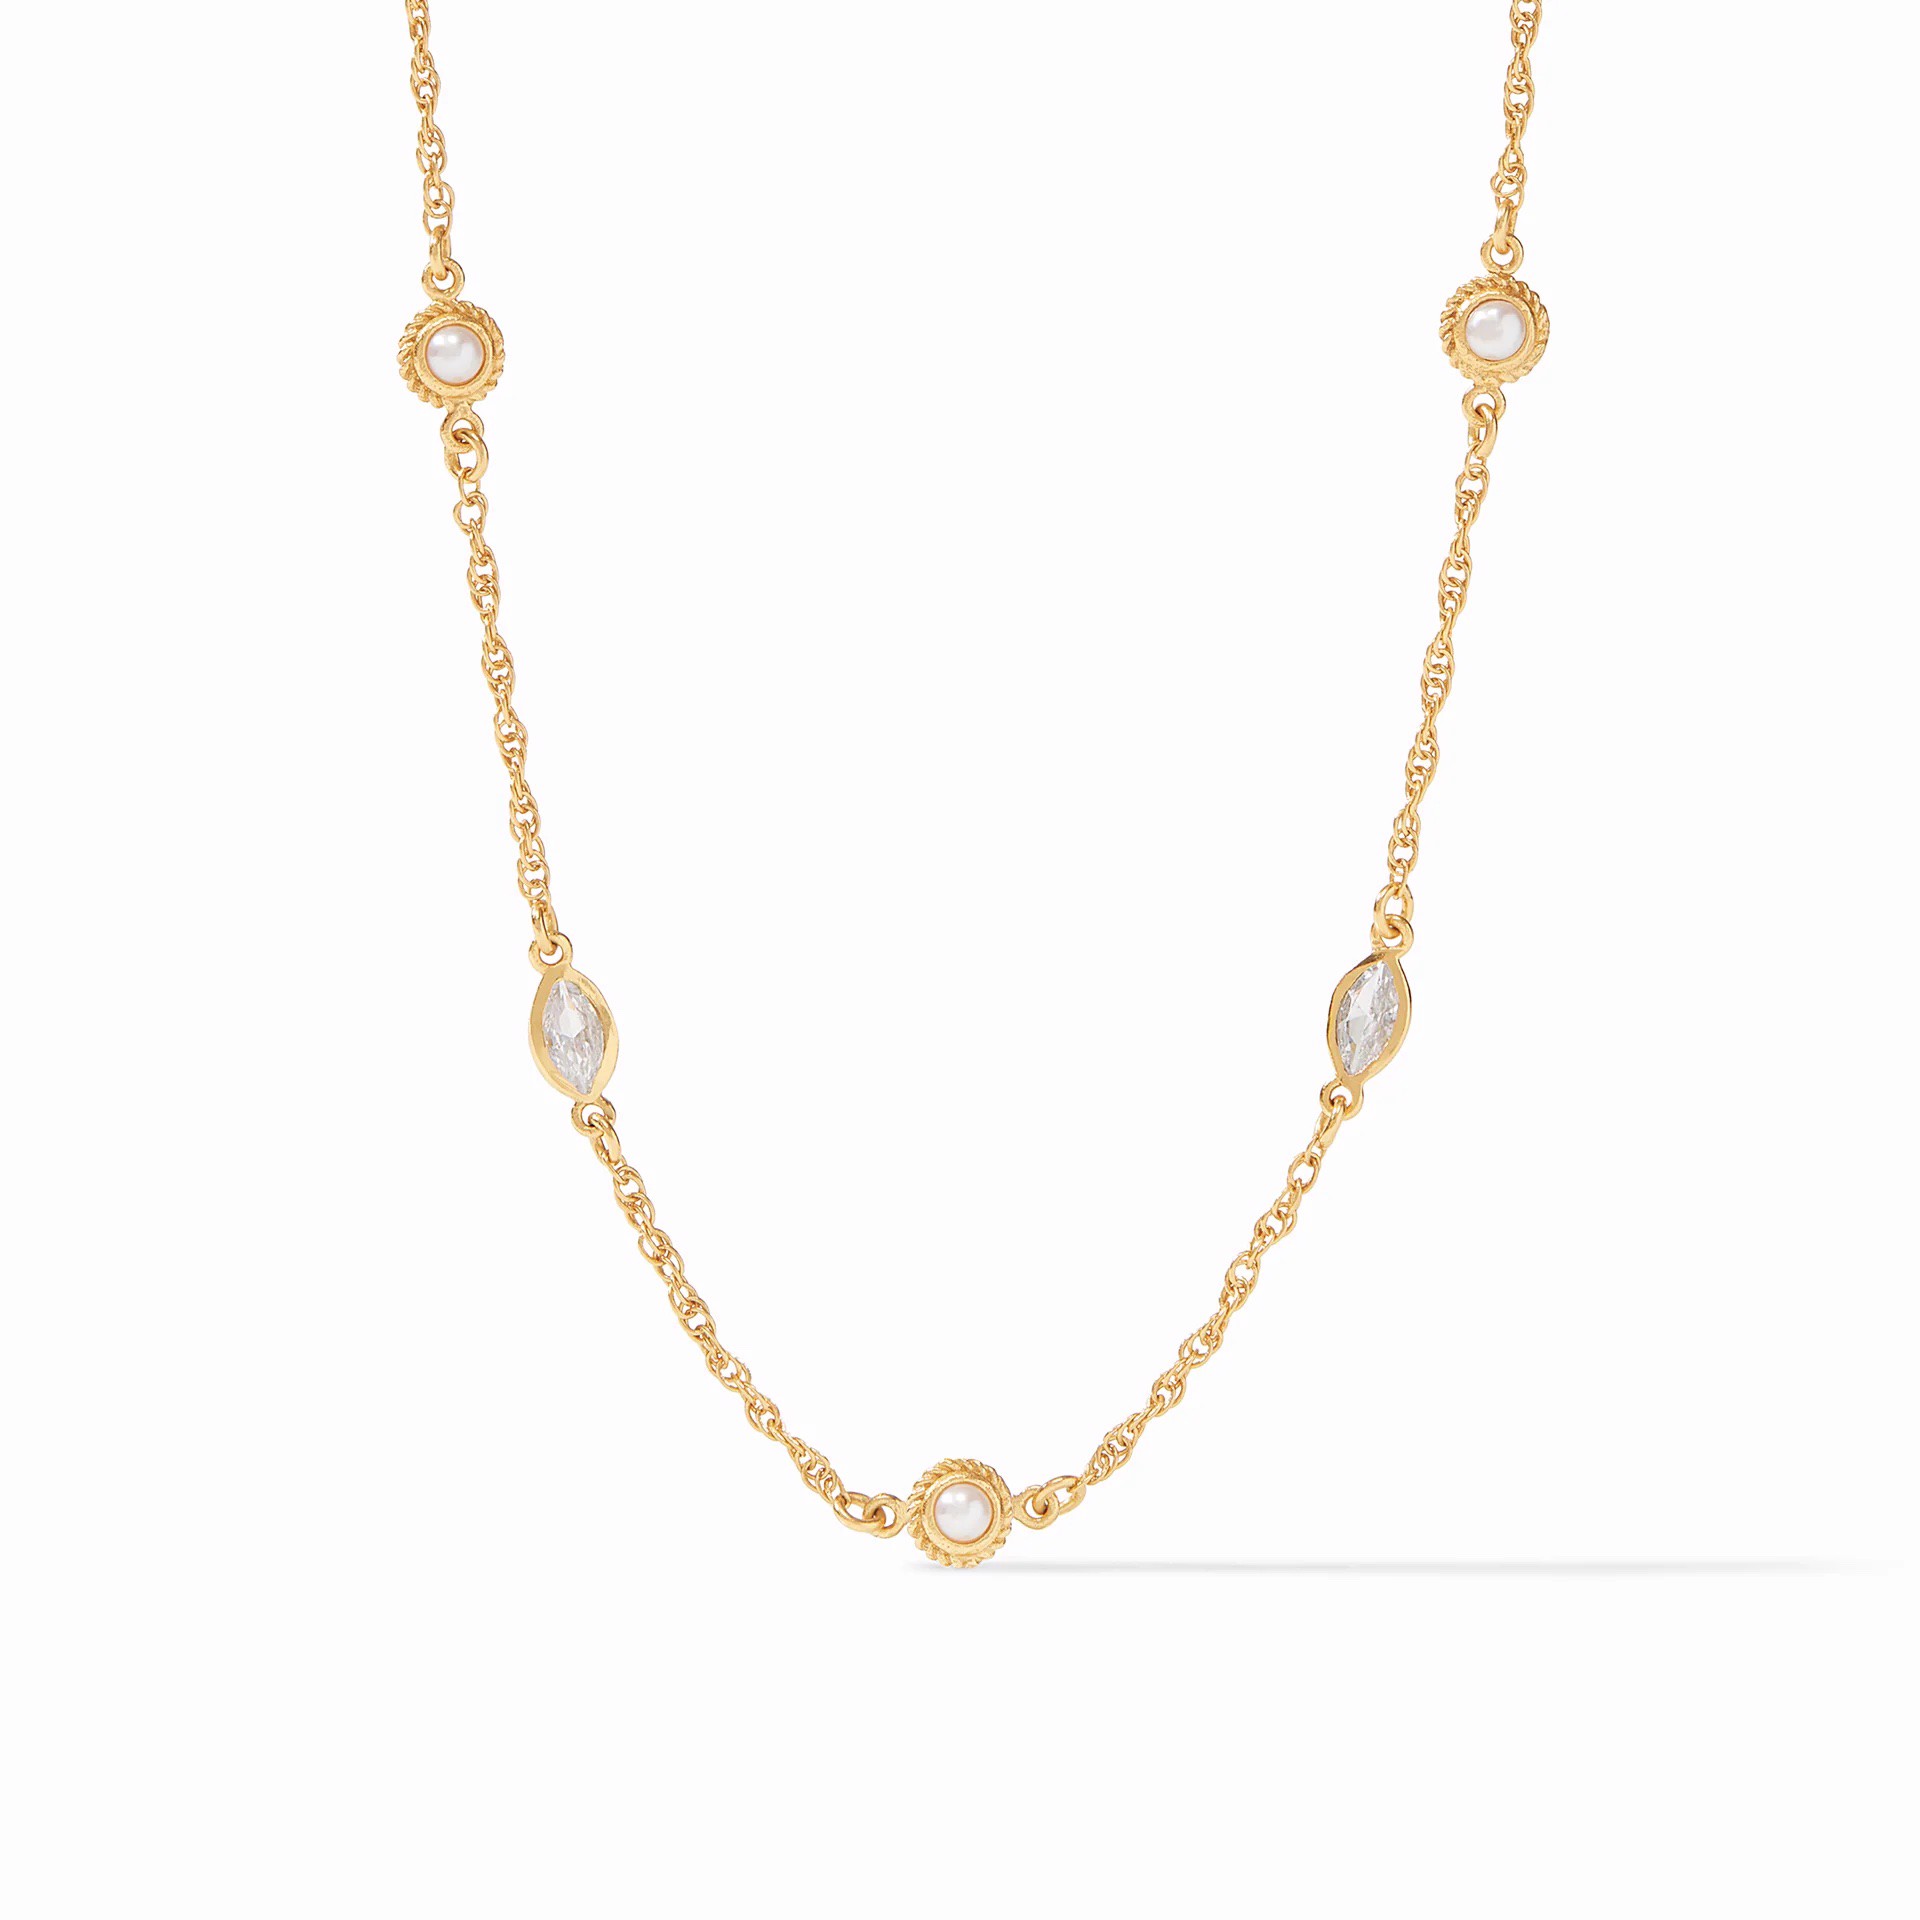 Monaco Delicate Station Necklace by Julie Vos